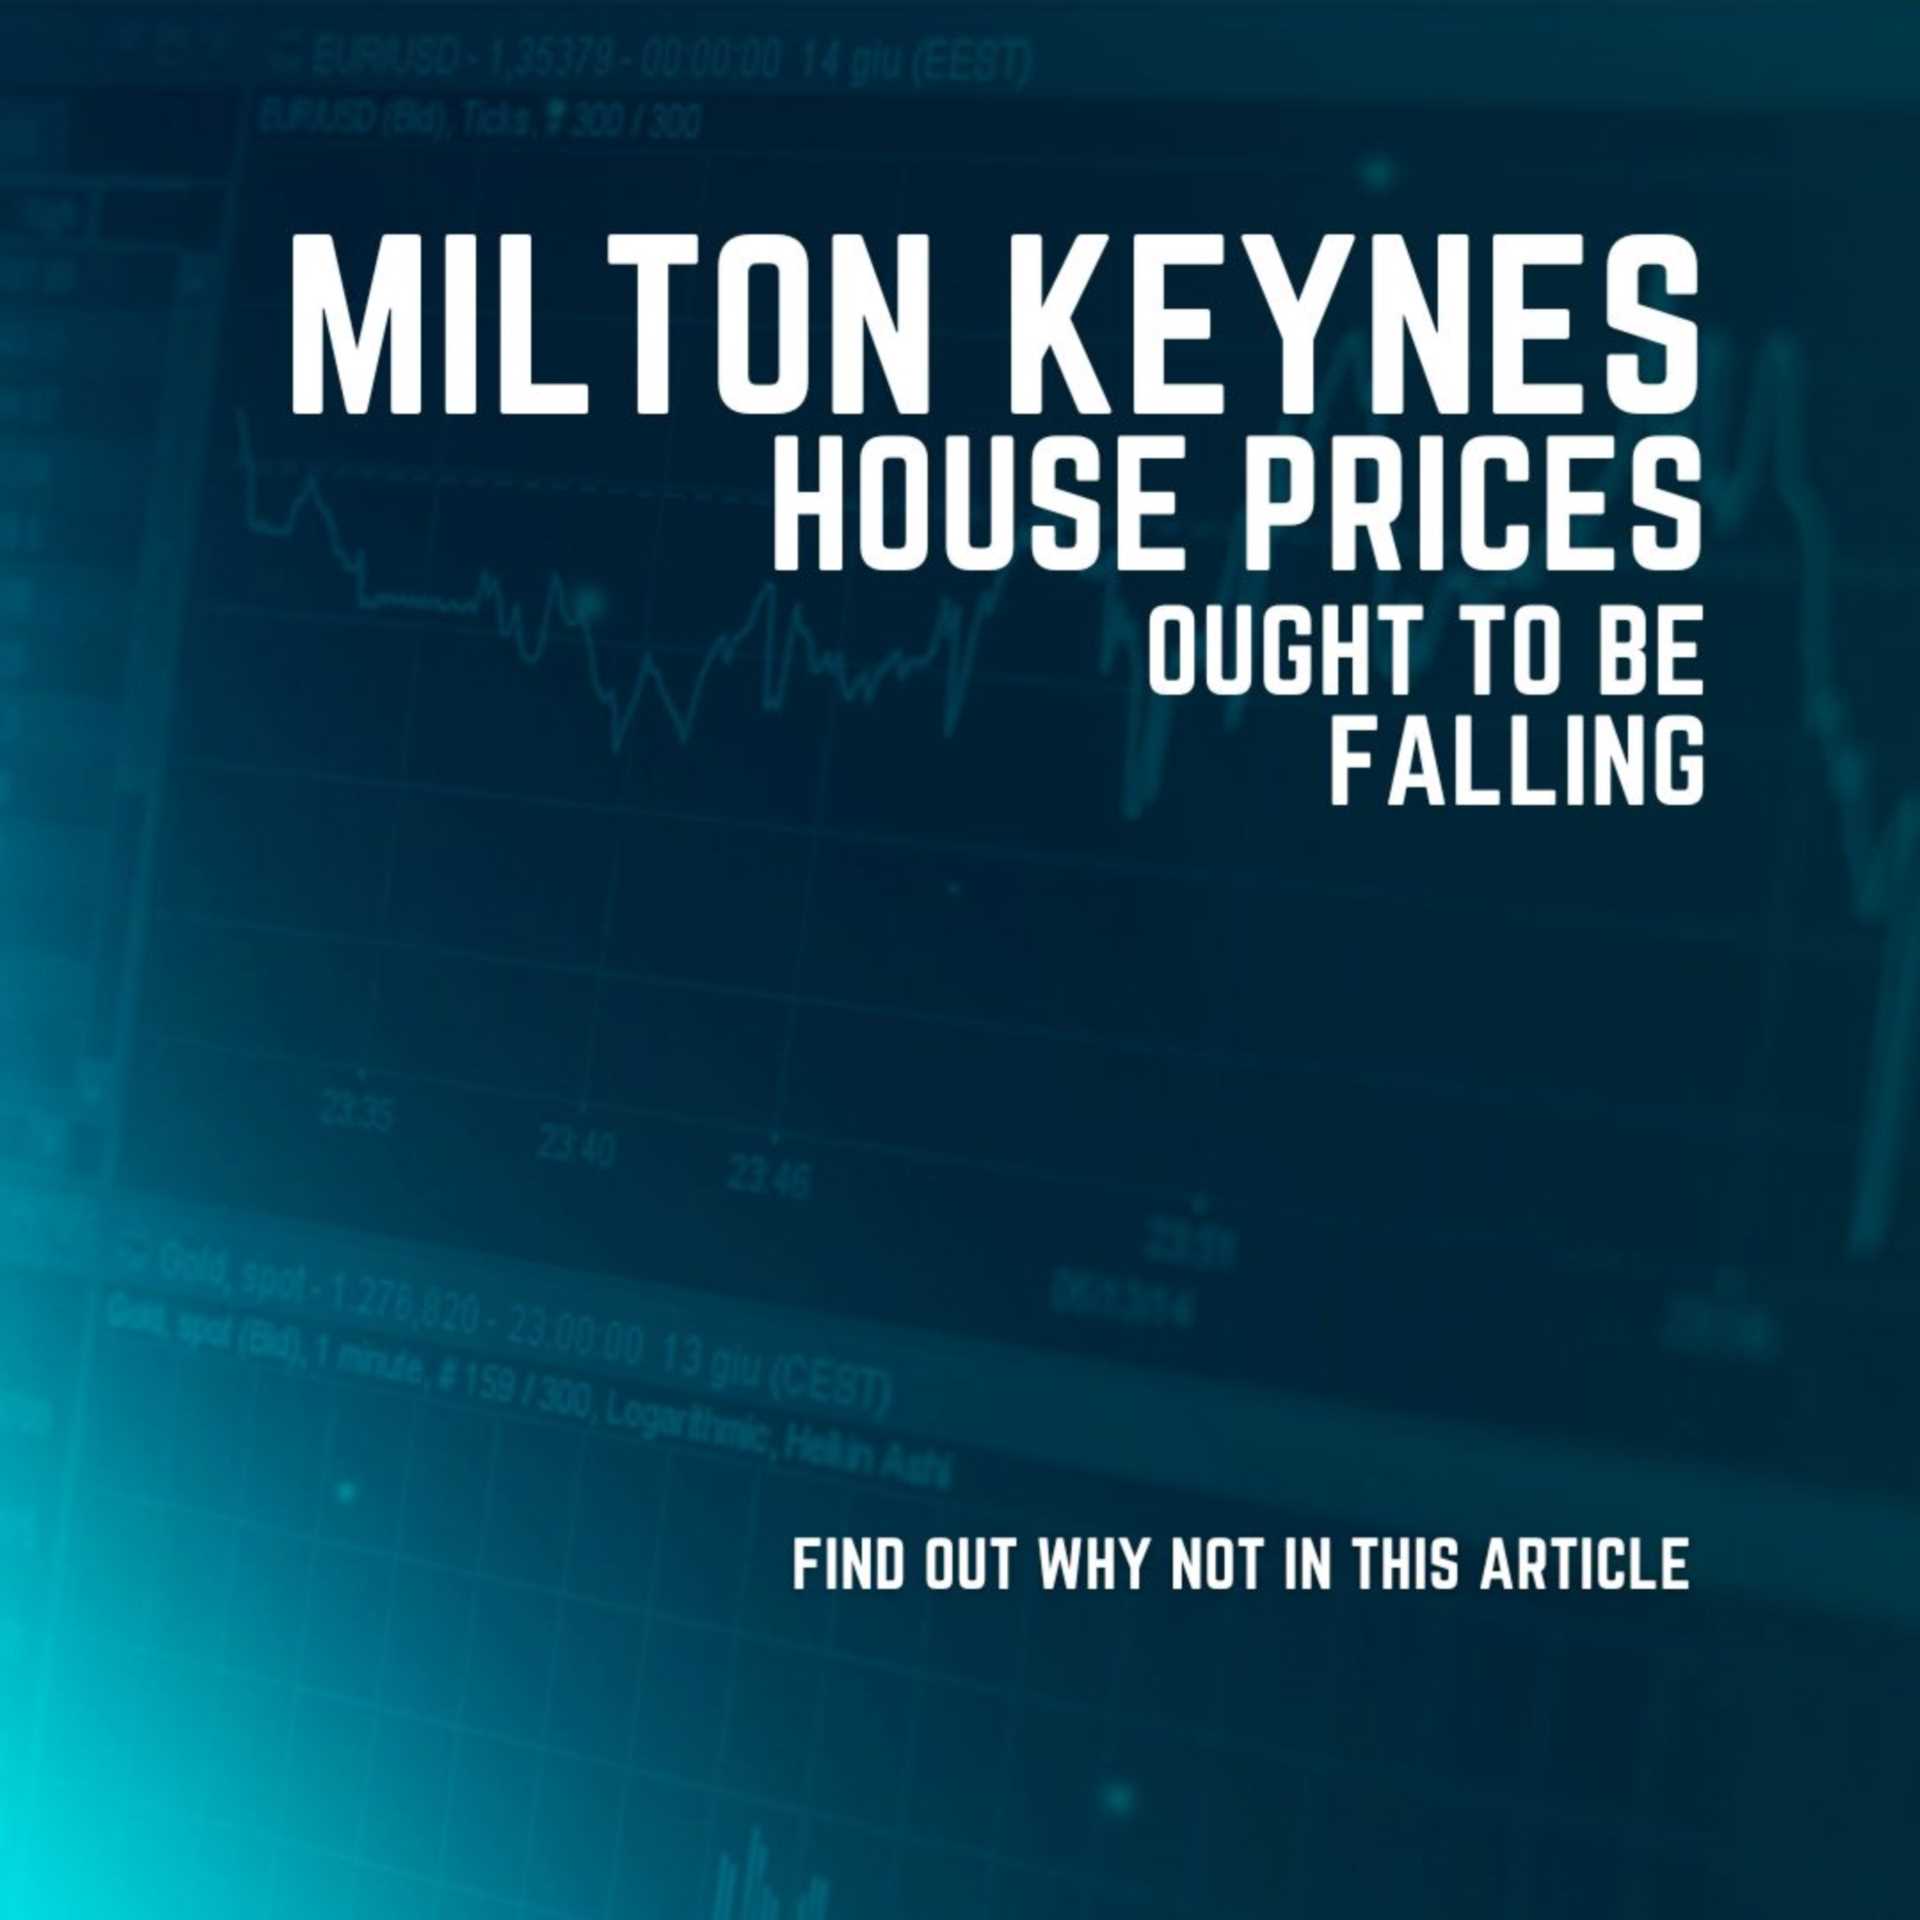 Milton Keynes House Prices Ought to be Falling –  these are the reasons they are not.